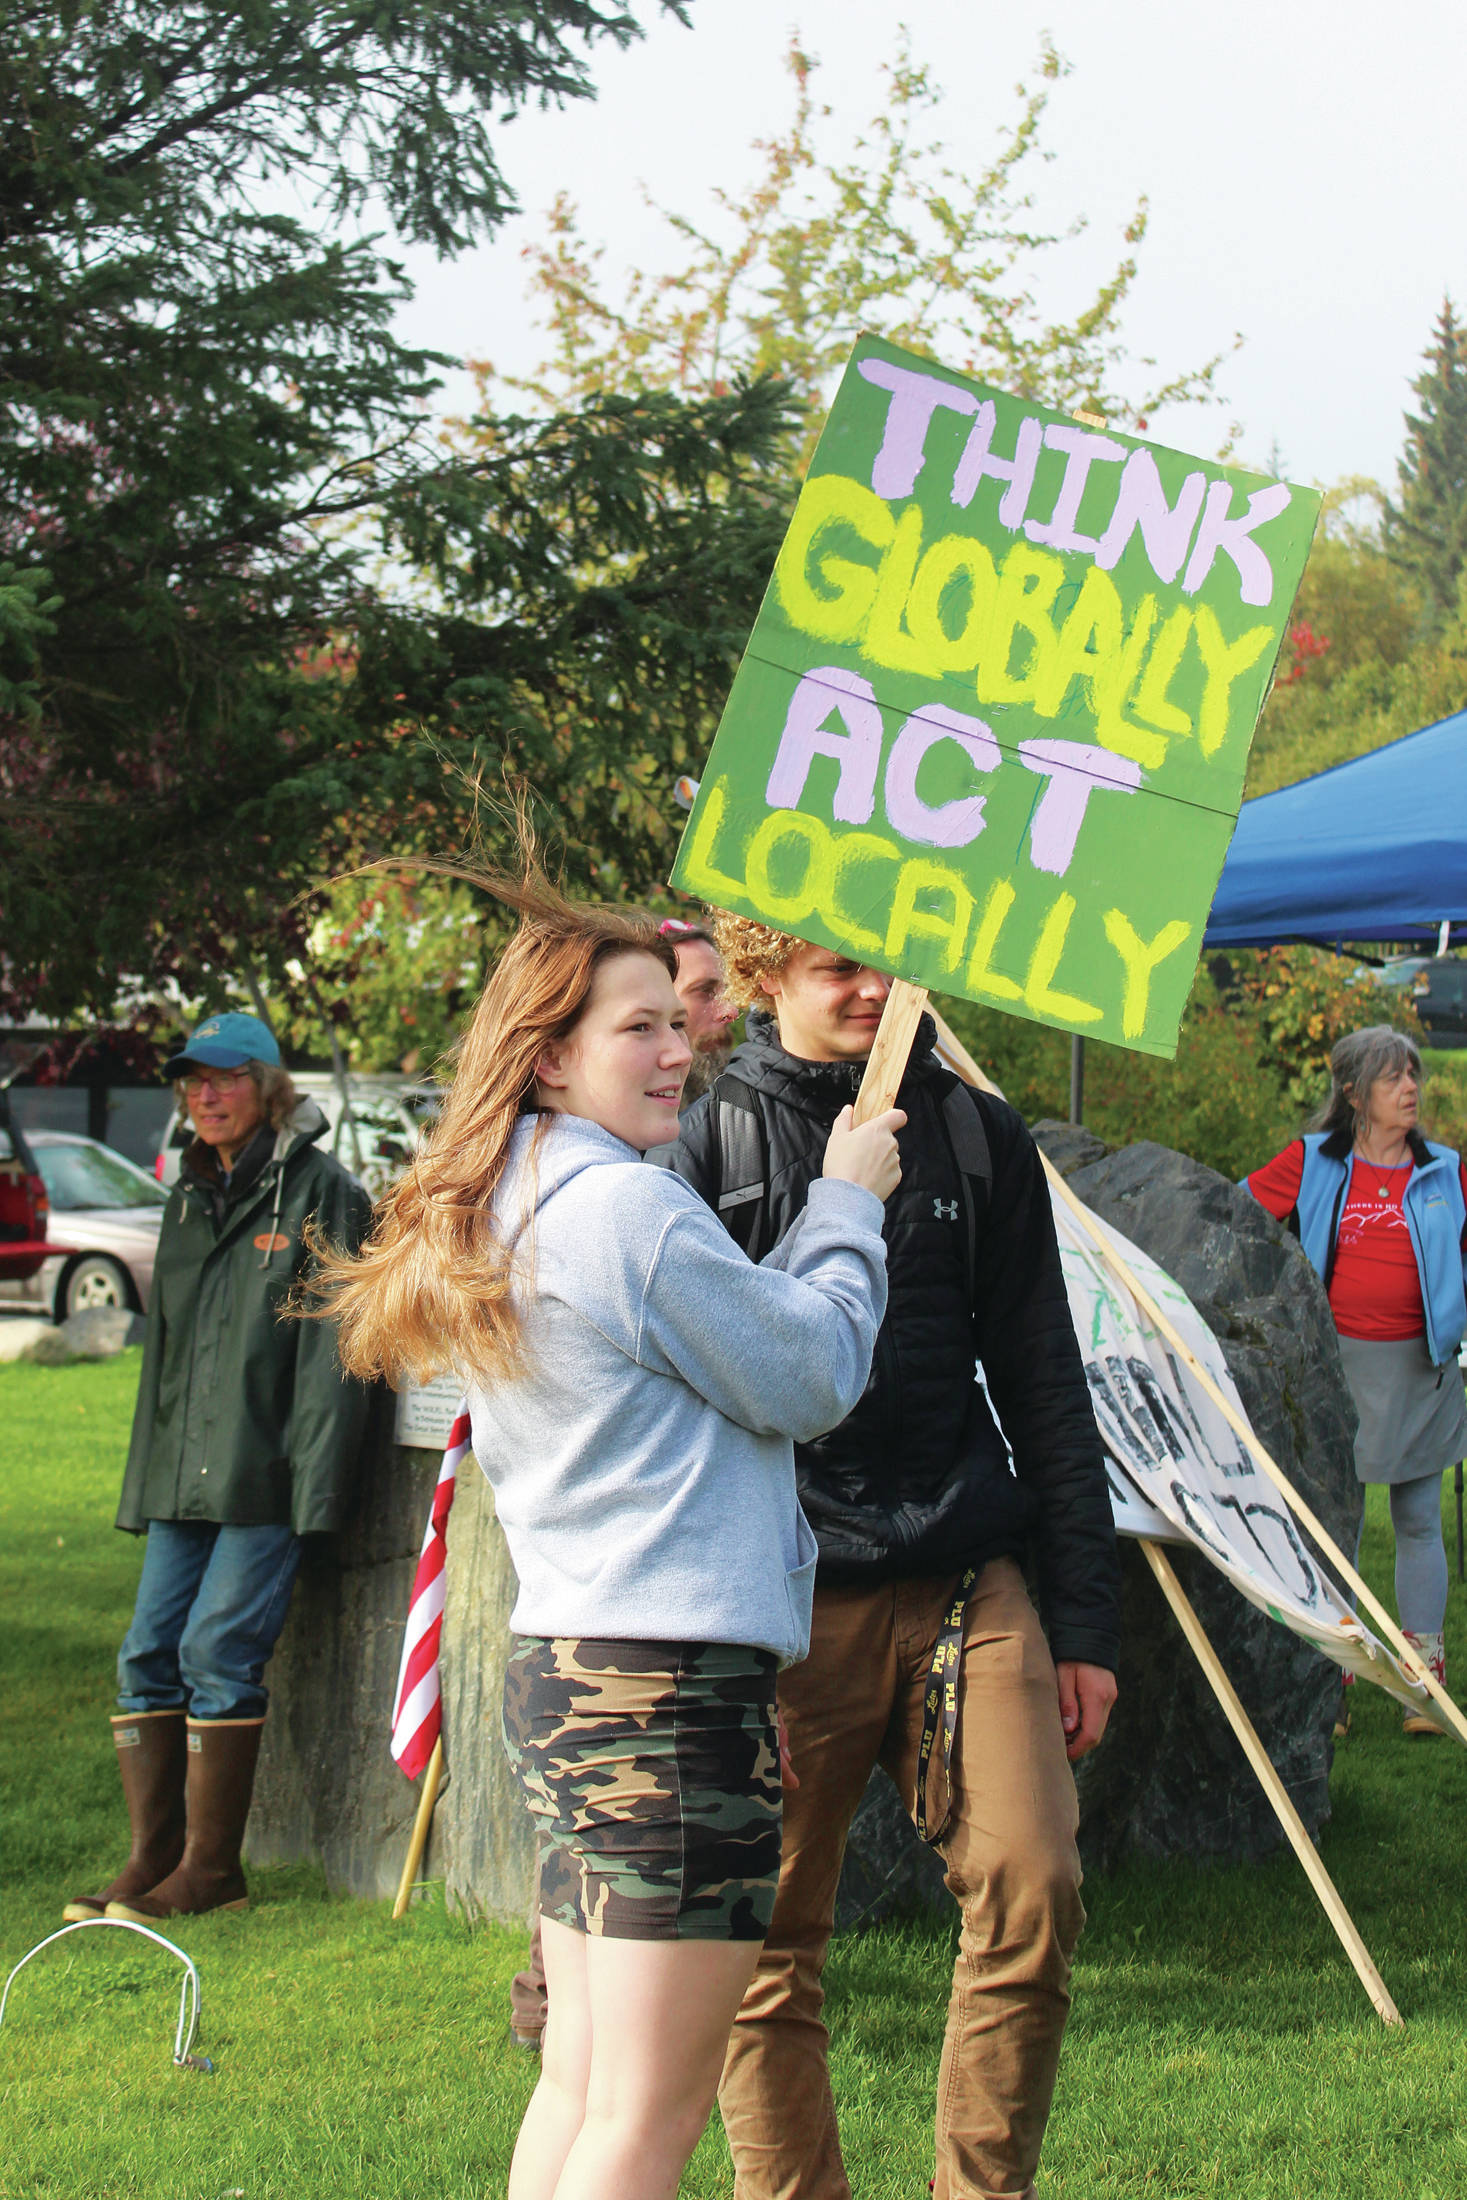 A student holds up a sign reading “Think globally act locally” during the Homer Youth Climate Strike on Friday, Sept. 20, 2019 at Wisdom, Knowledge, Faith and Love Park in Homer, Alaska. (Photo by Megan Pacer/Homer News)